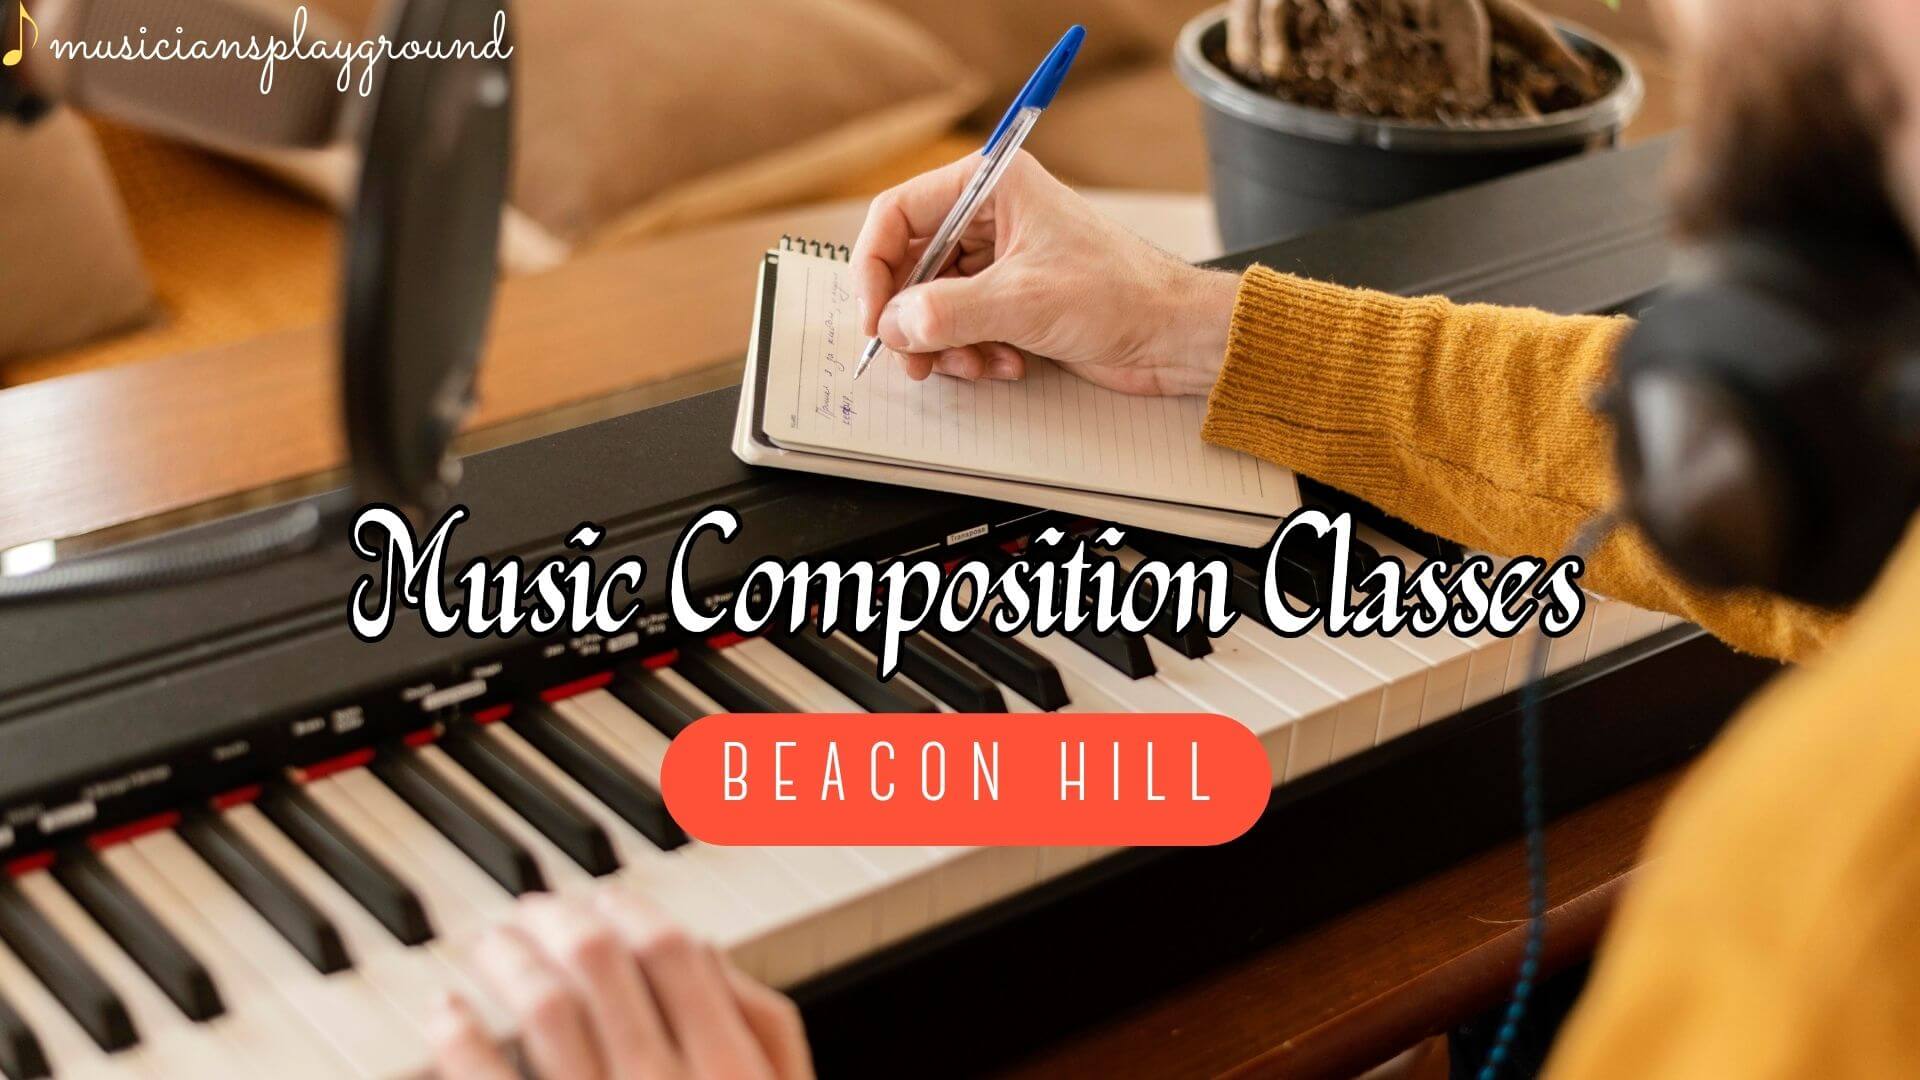 Music Composition Classes in Beacon Hill, Massachusetts: Unlock Your Musical Potential at Musicians Playground